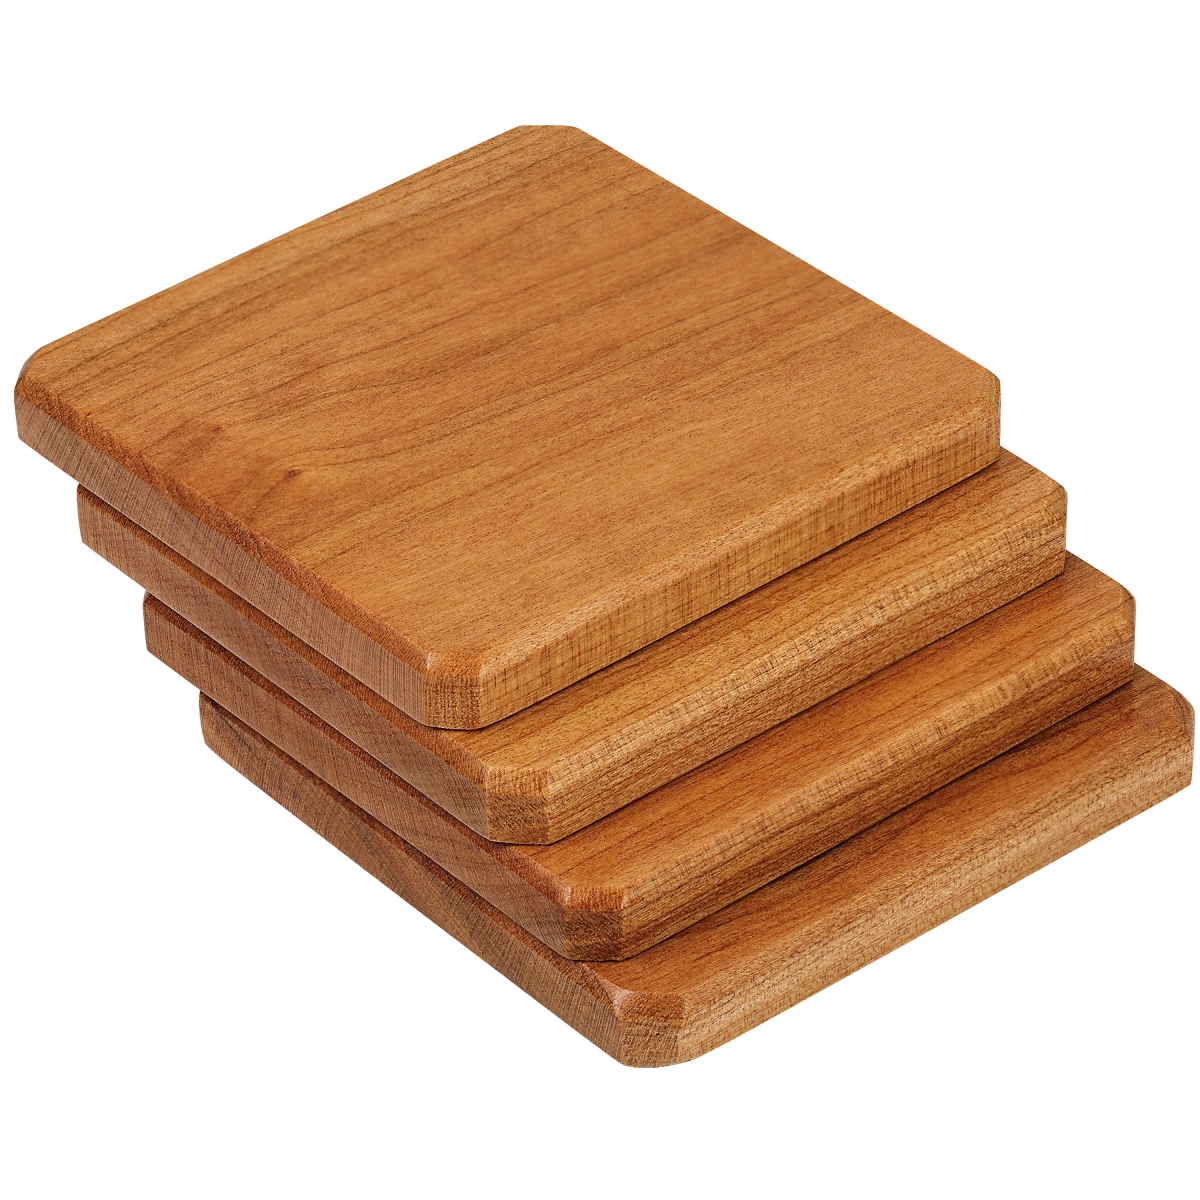 Picture of A & E Millwork AEM-5003 Cherry Wood Coasters Edge Grain - Set of 4